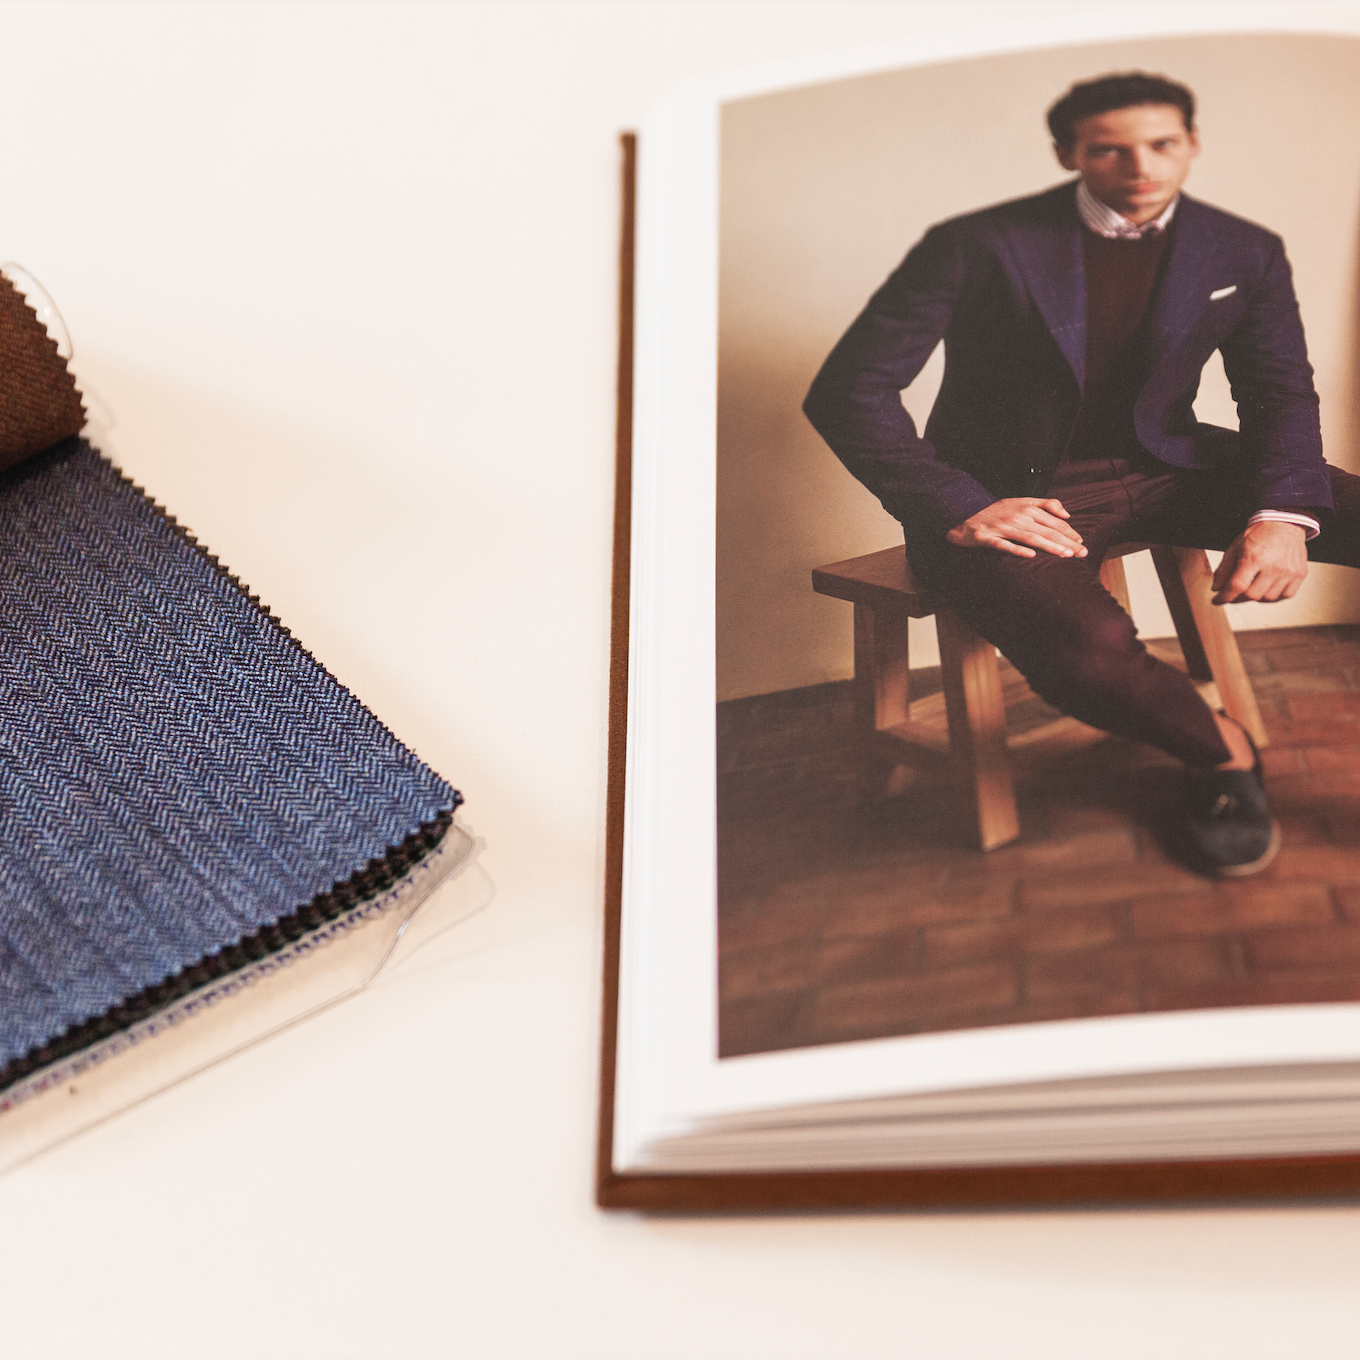 3 Reasons Why People Invest in a Kale & Co Bespoke Suit